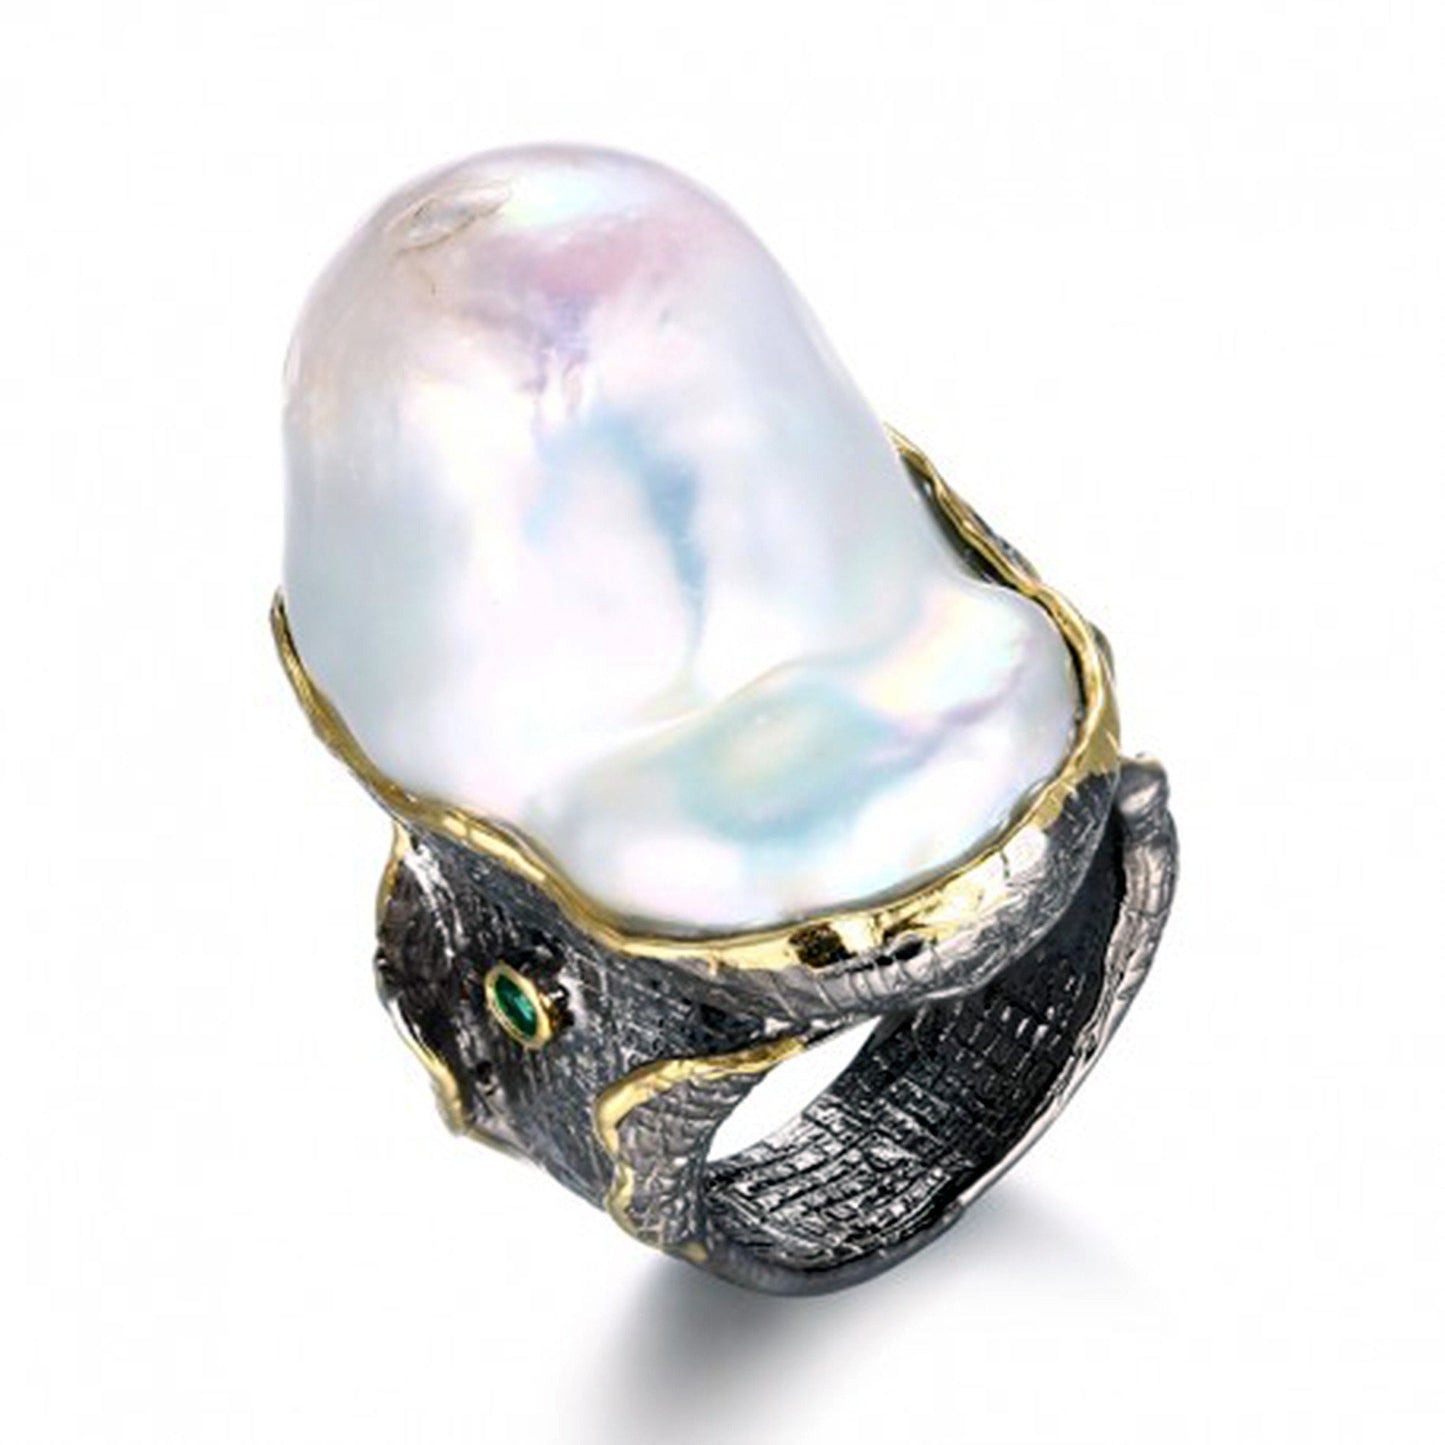 Baroque Pearl ring in sterling silver and gold overlay accents with gemstones - Providence silver gold jewelry usa